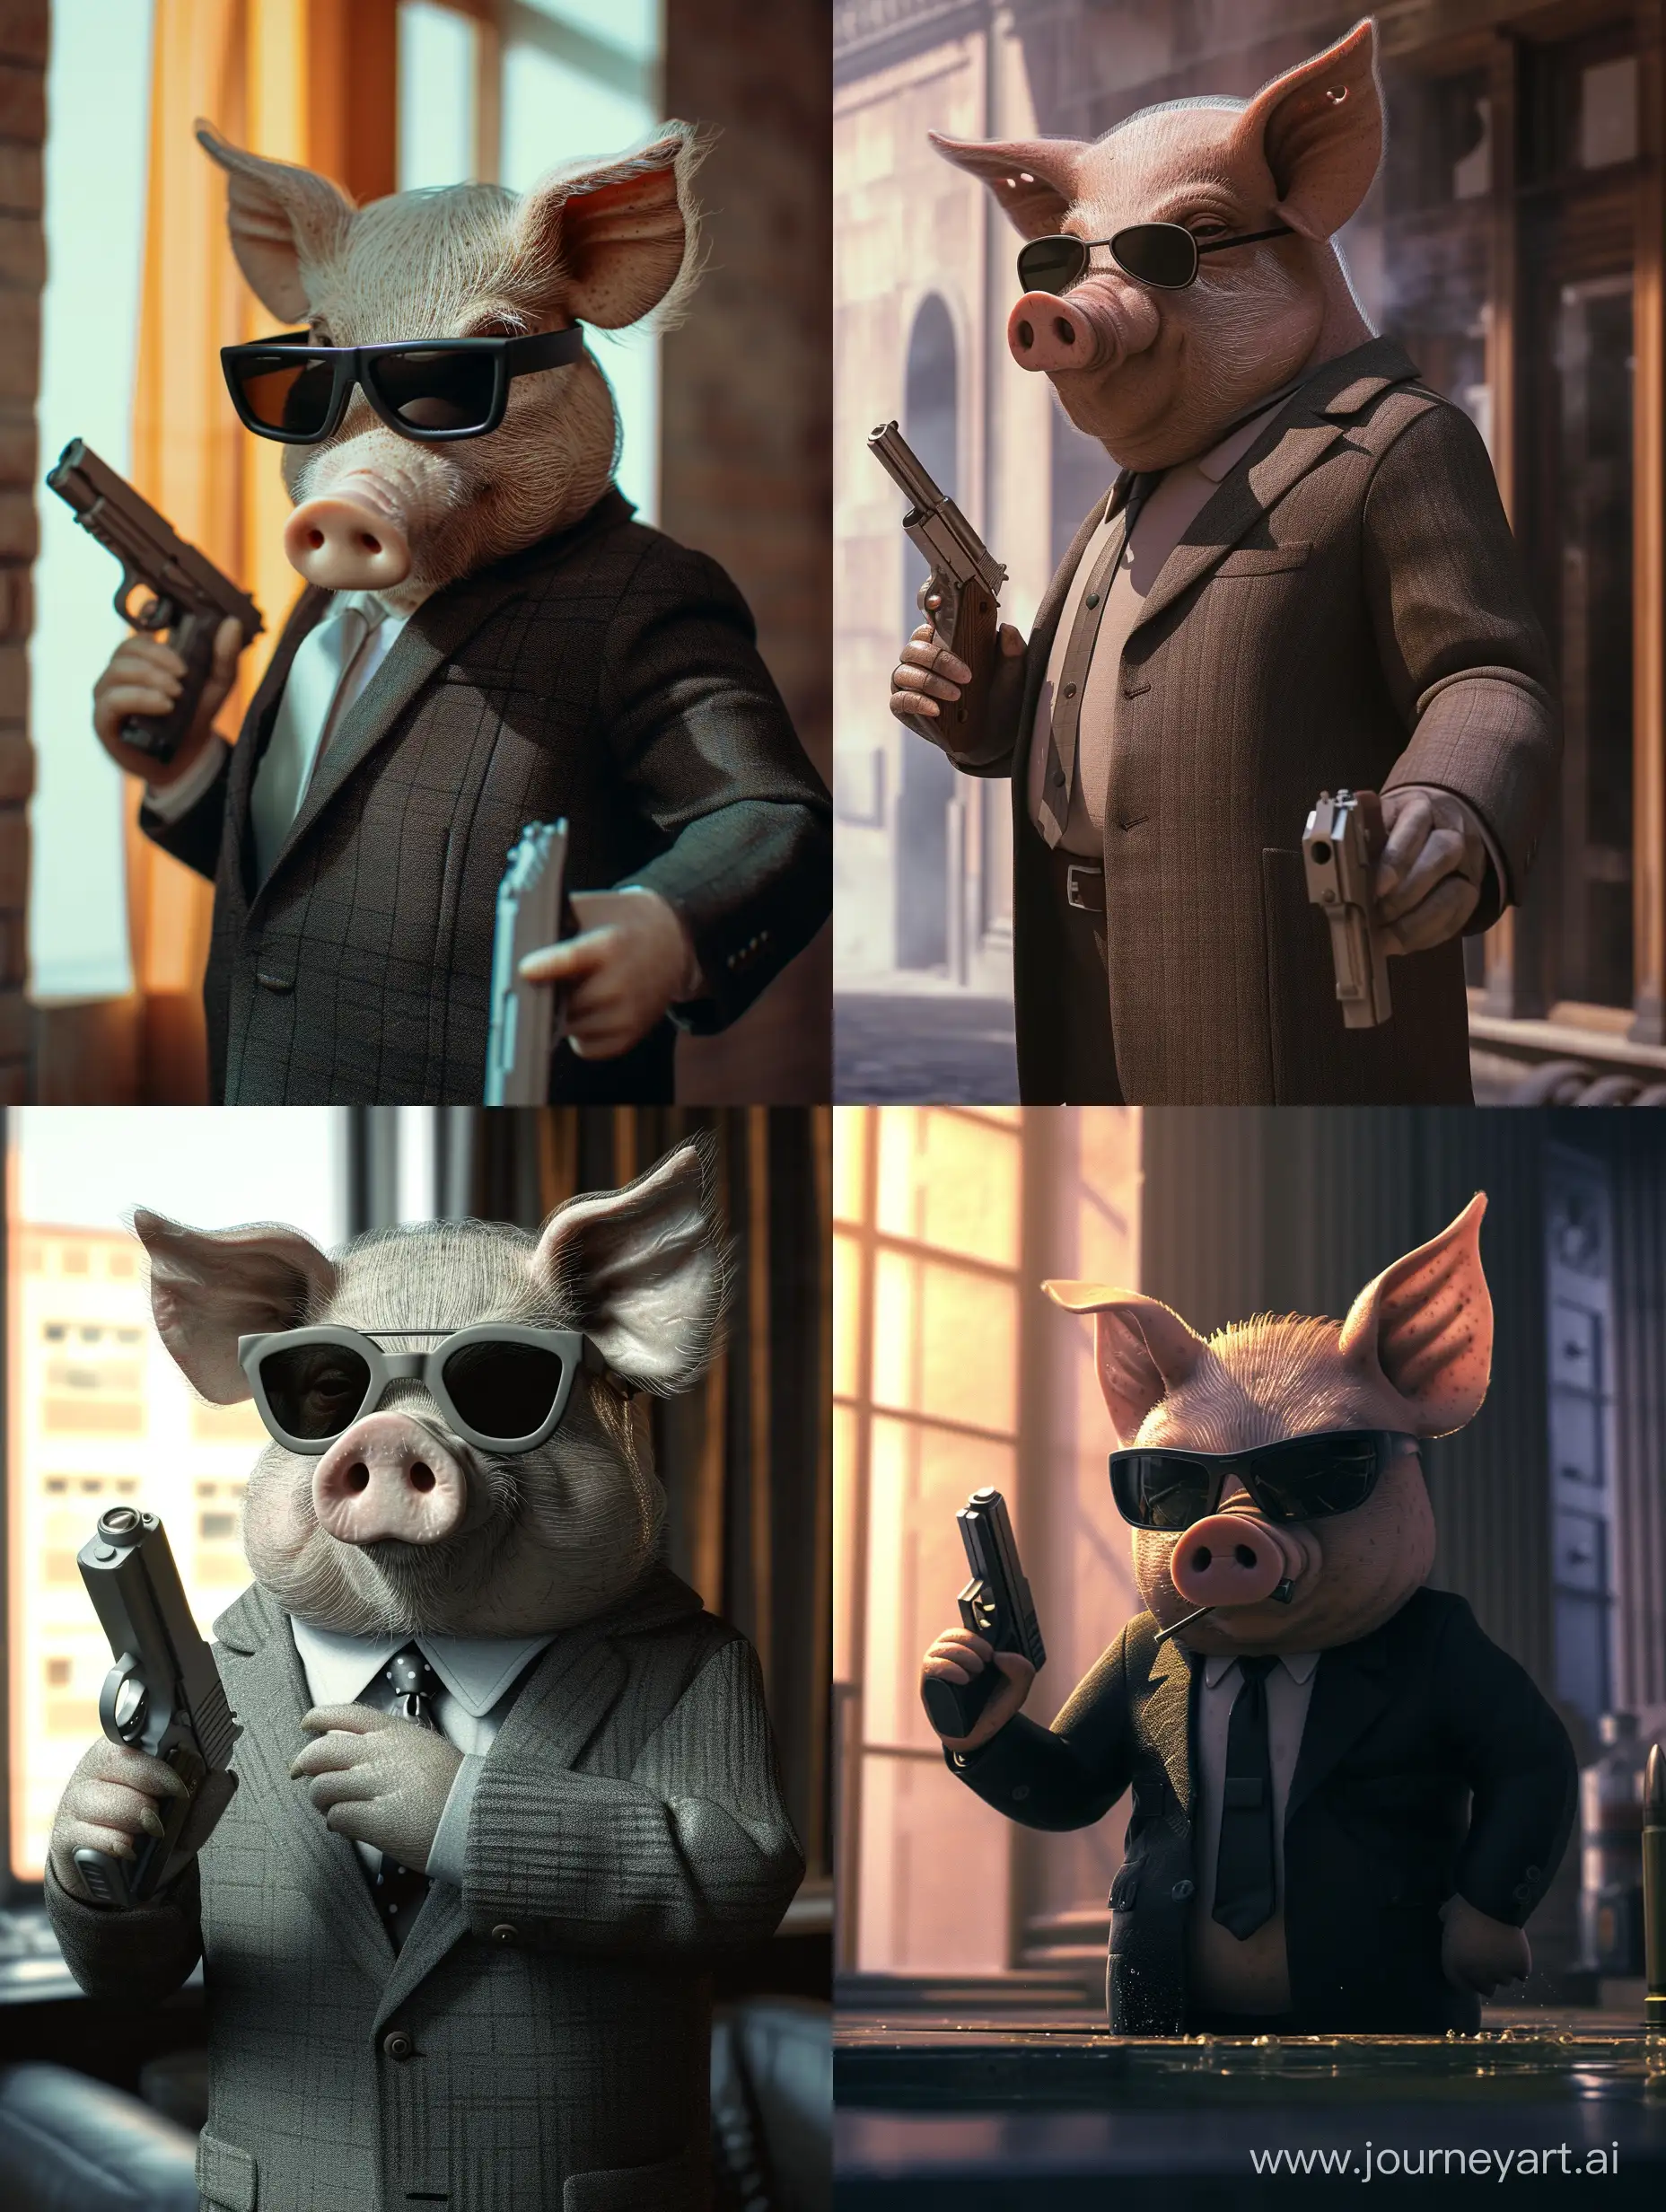 A pig in a suit, a spy, wearing sunglasses, holding a gun, in a real environment